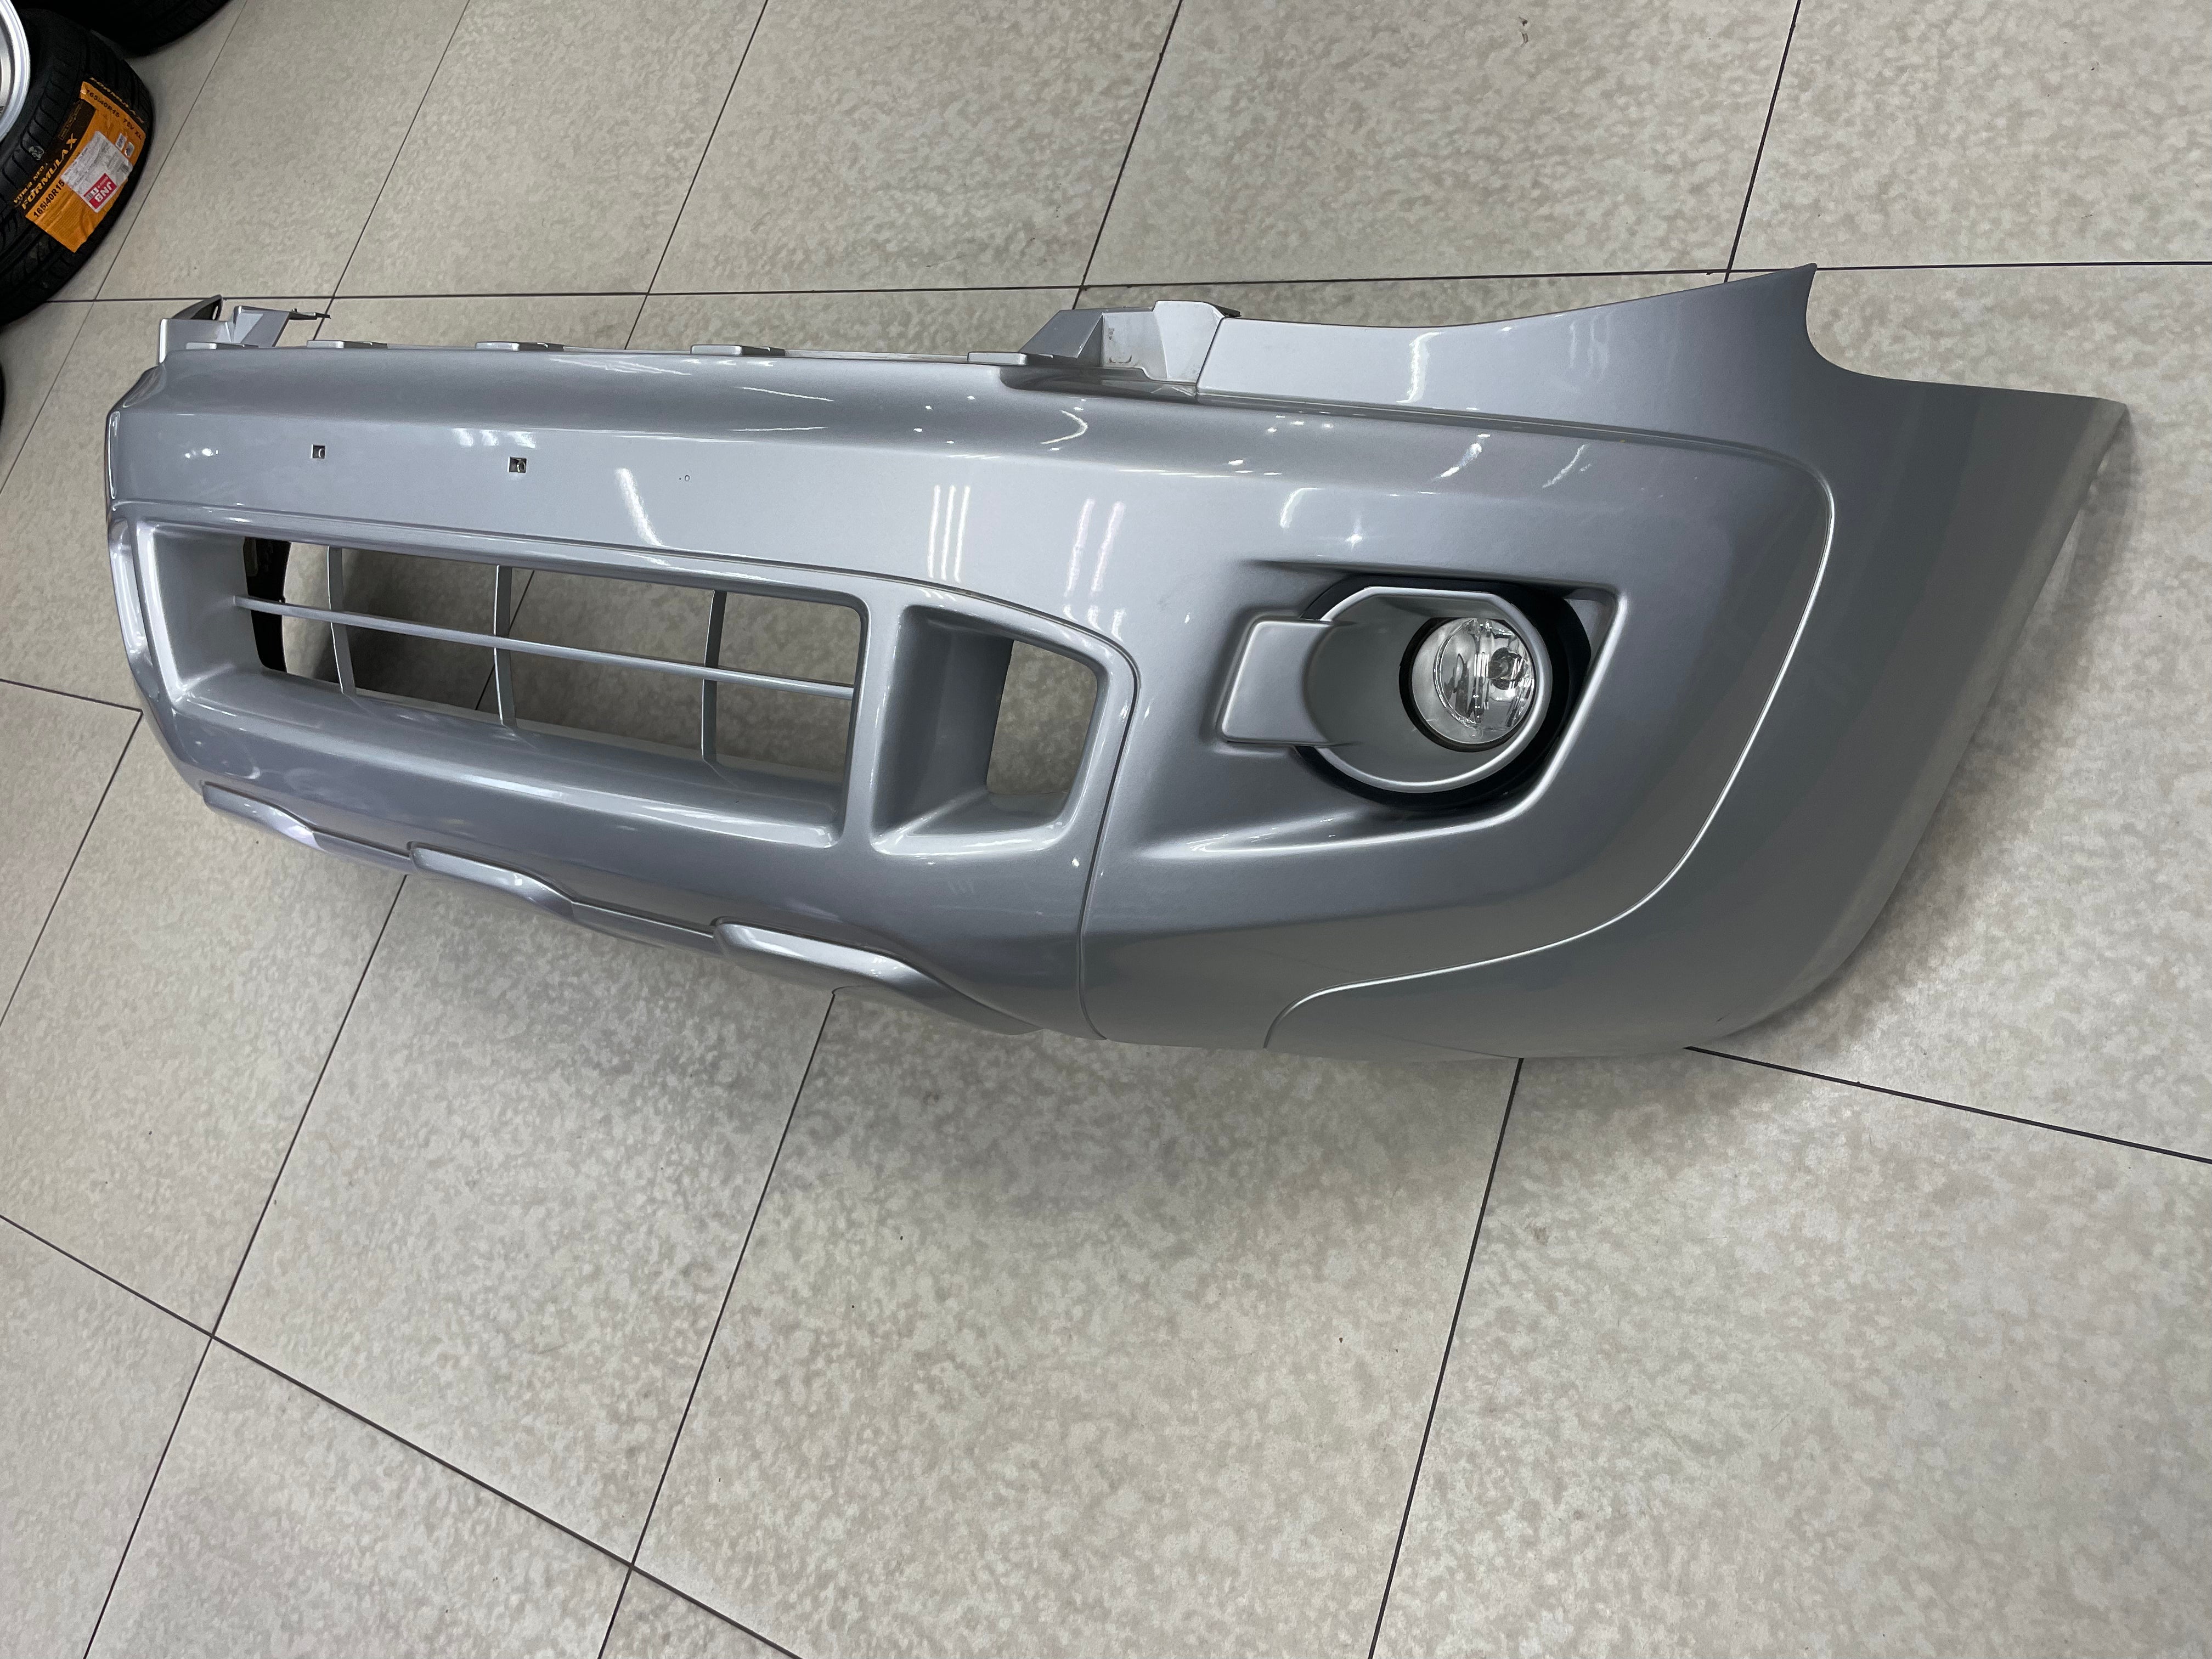 FORD RANGER 2012 XLT T6  OEM FRONT BUMPER WITH FOGS